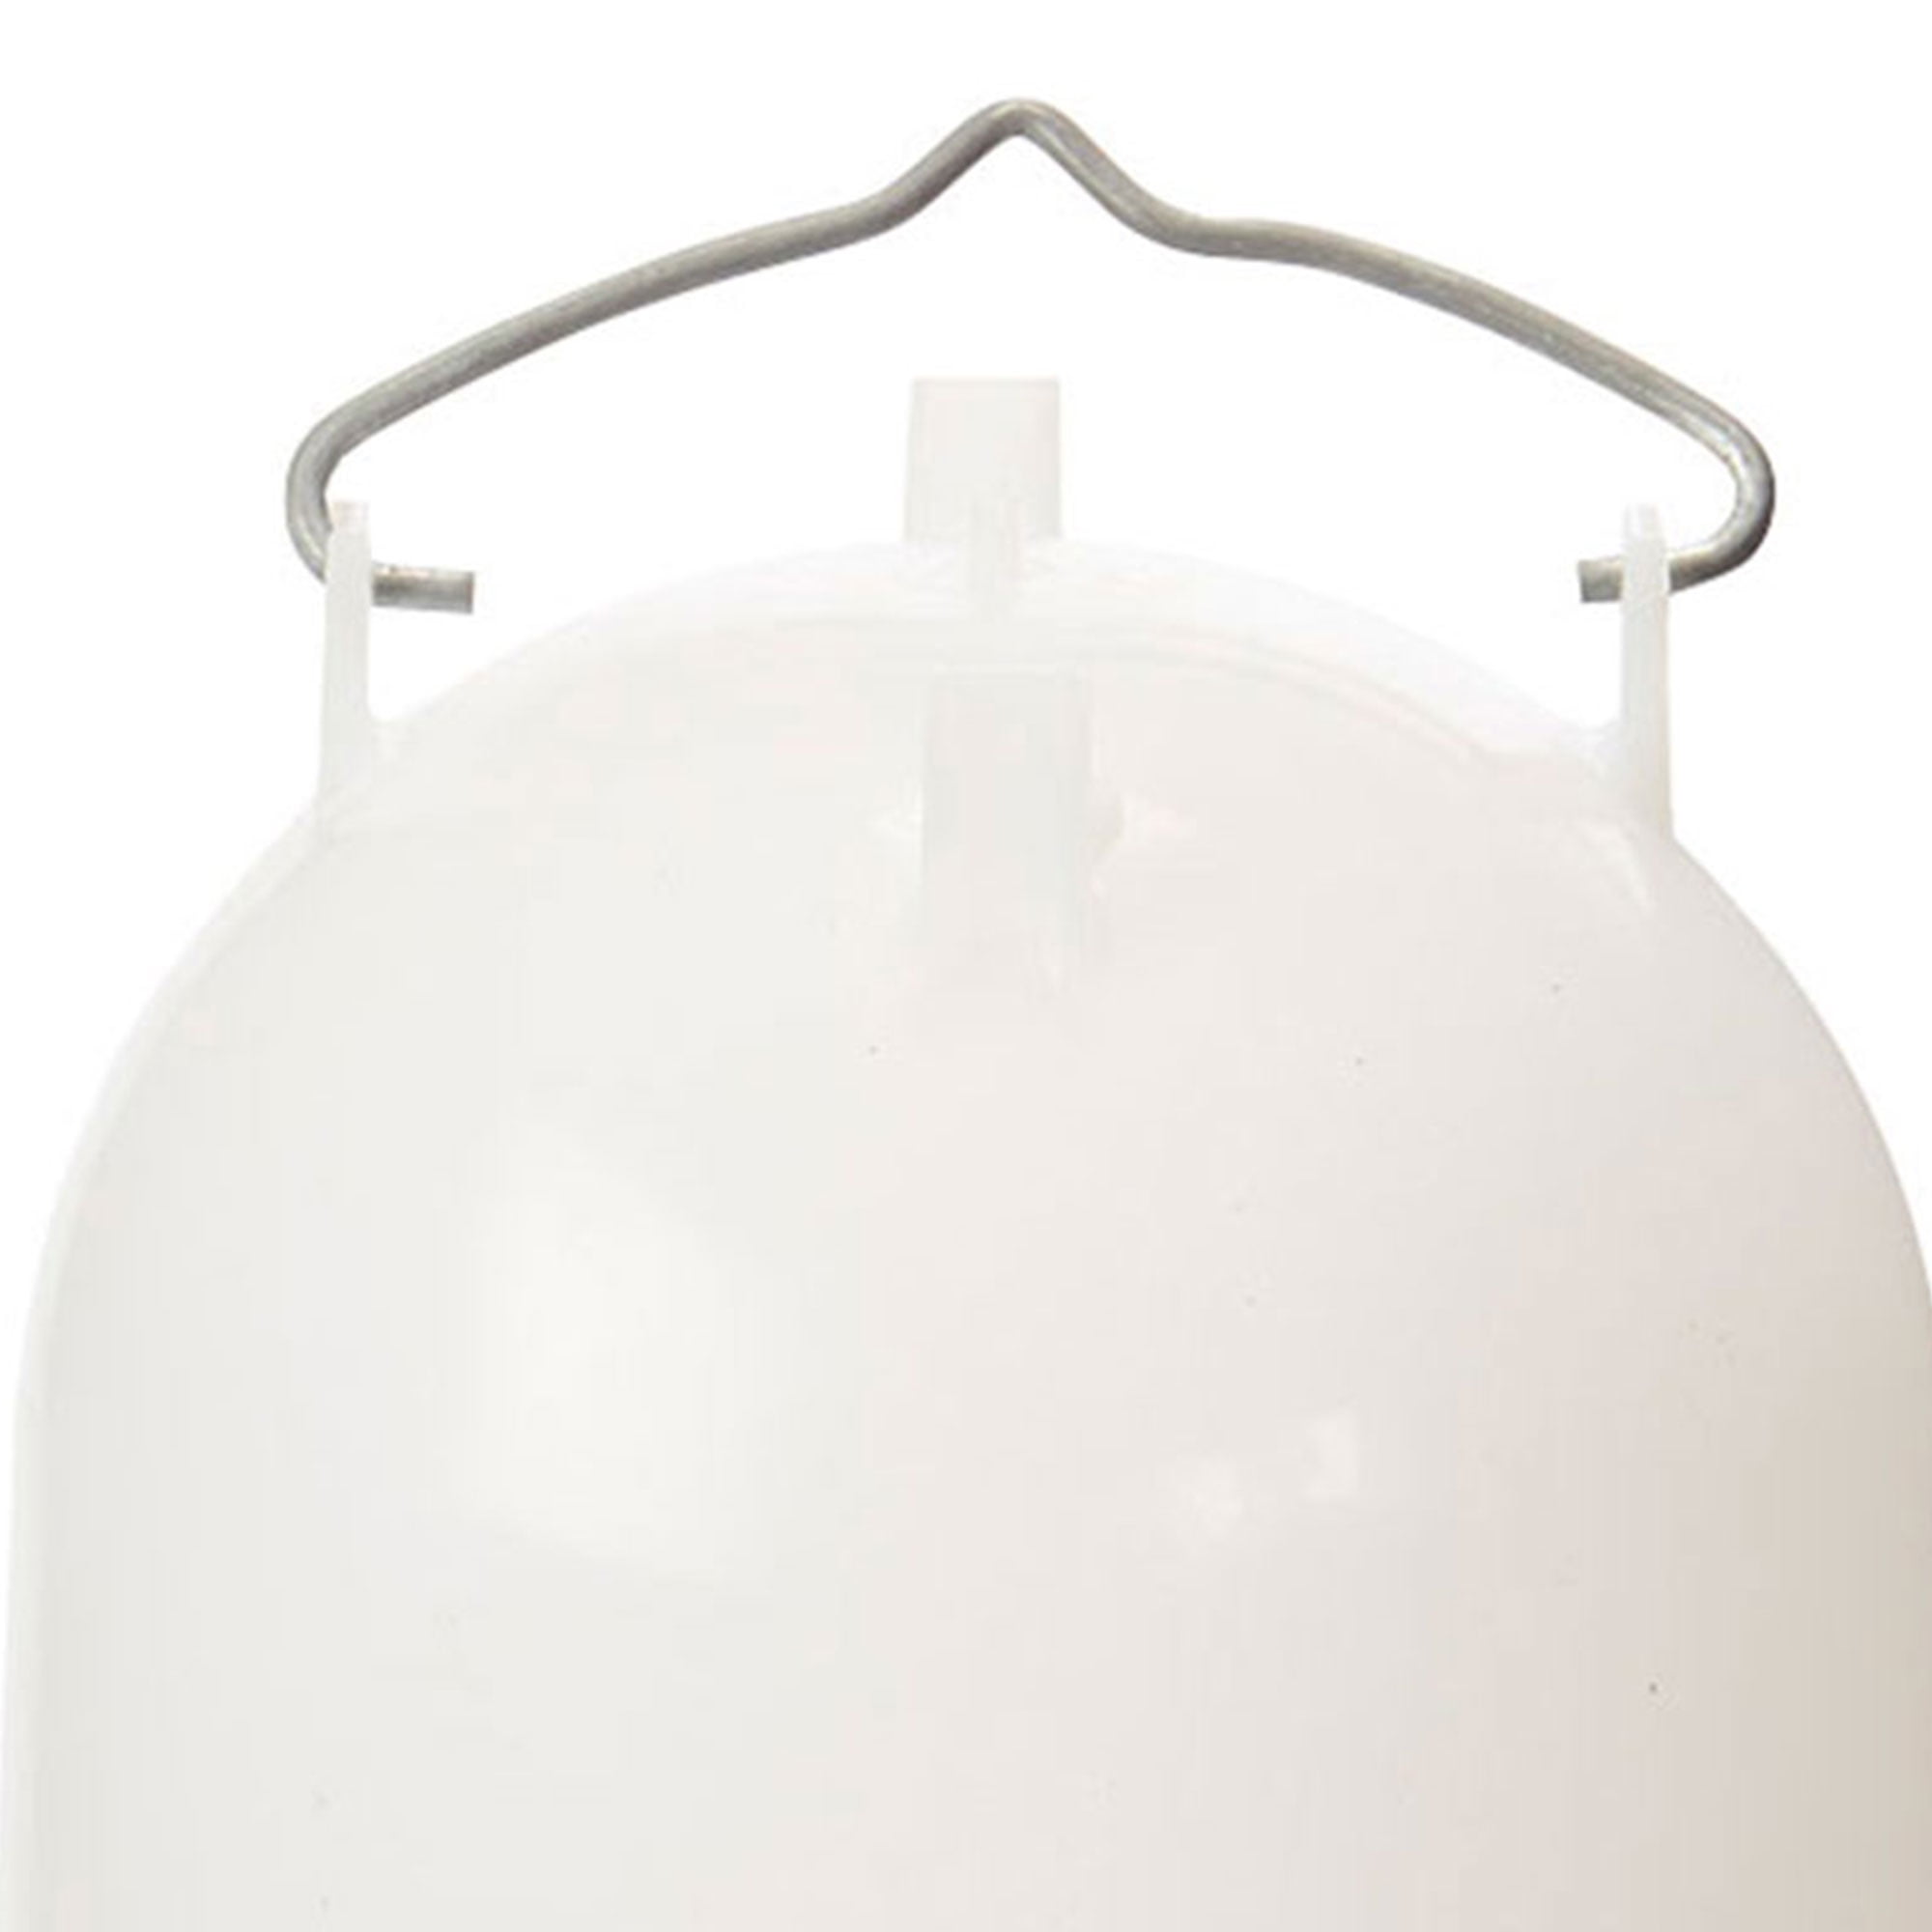 Miller Manufacturing DHH1 Deluxe Hen Hydrator [gal] (3 qt)